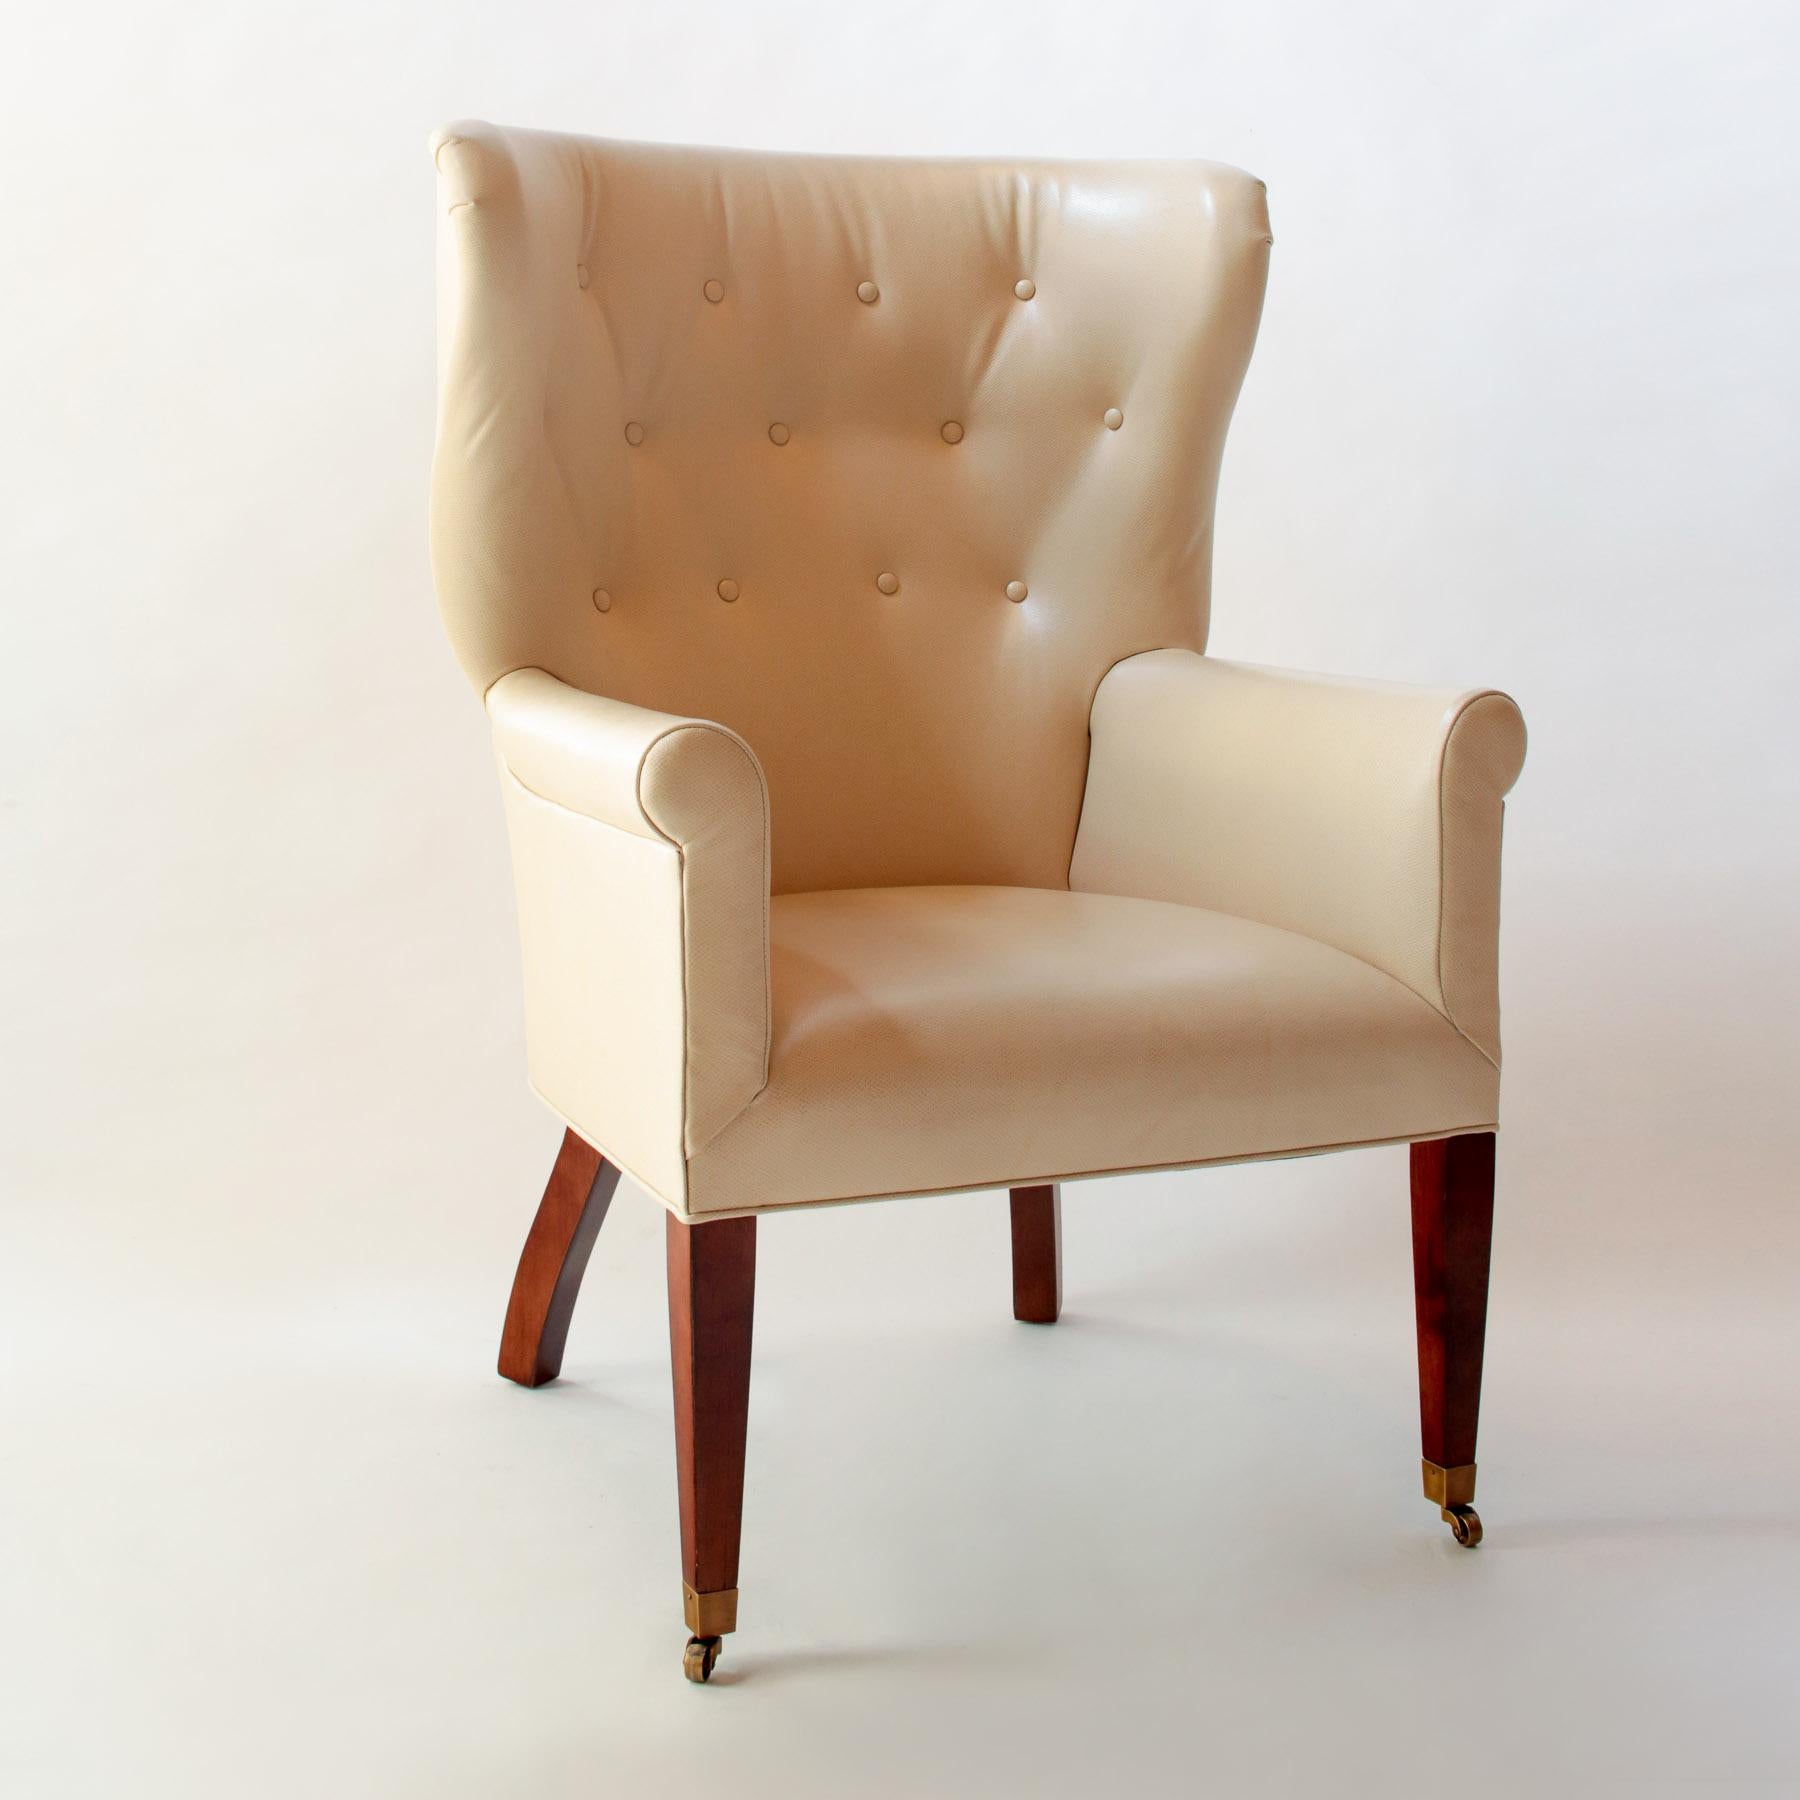 Contemporary/Transitional Georgian style tufted barrel back wing chair with legs in a mahogany finish, the front two legs terminating in brass casters. Upholstered in custom-colored Wagon Lit Edelman embossed leather.